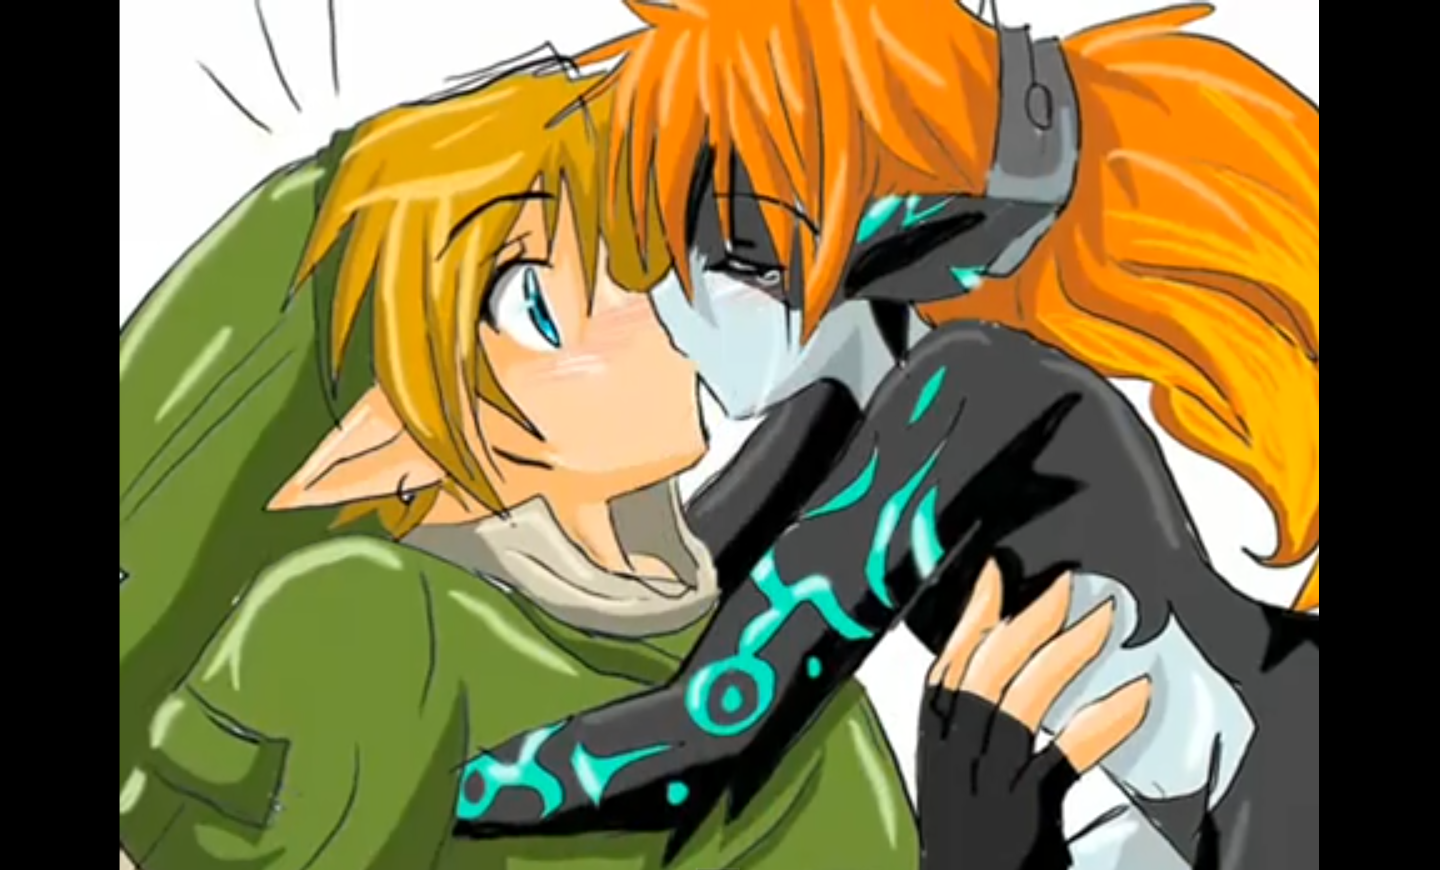 Link x midna fanfic